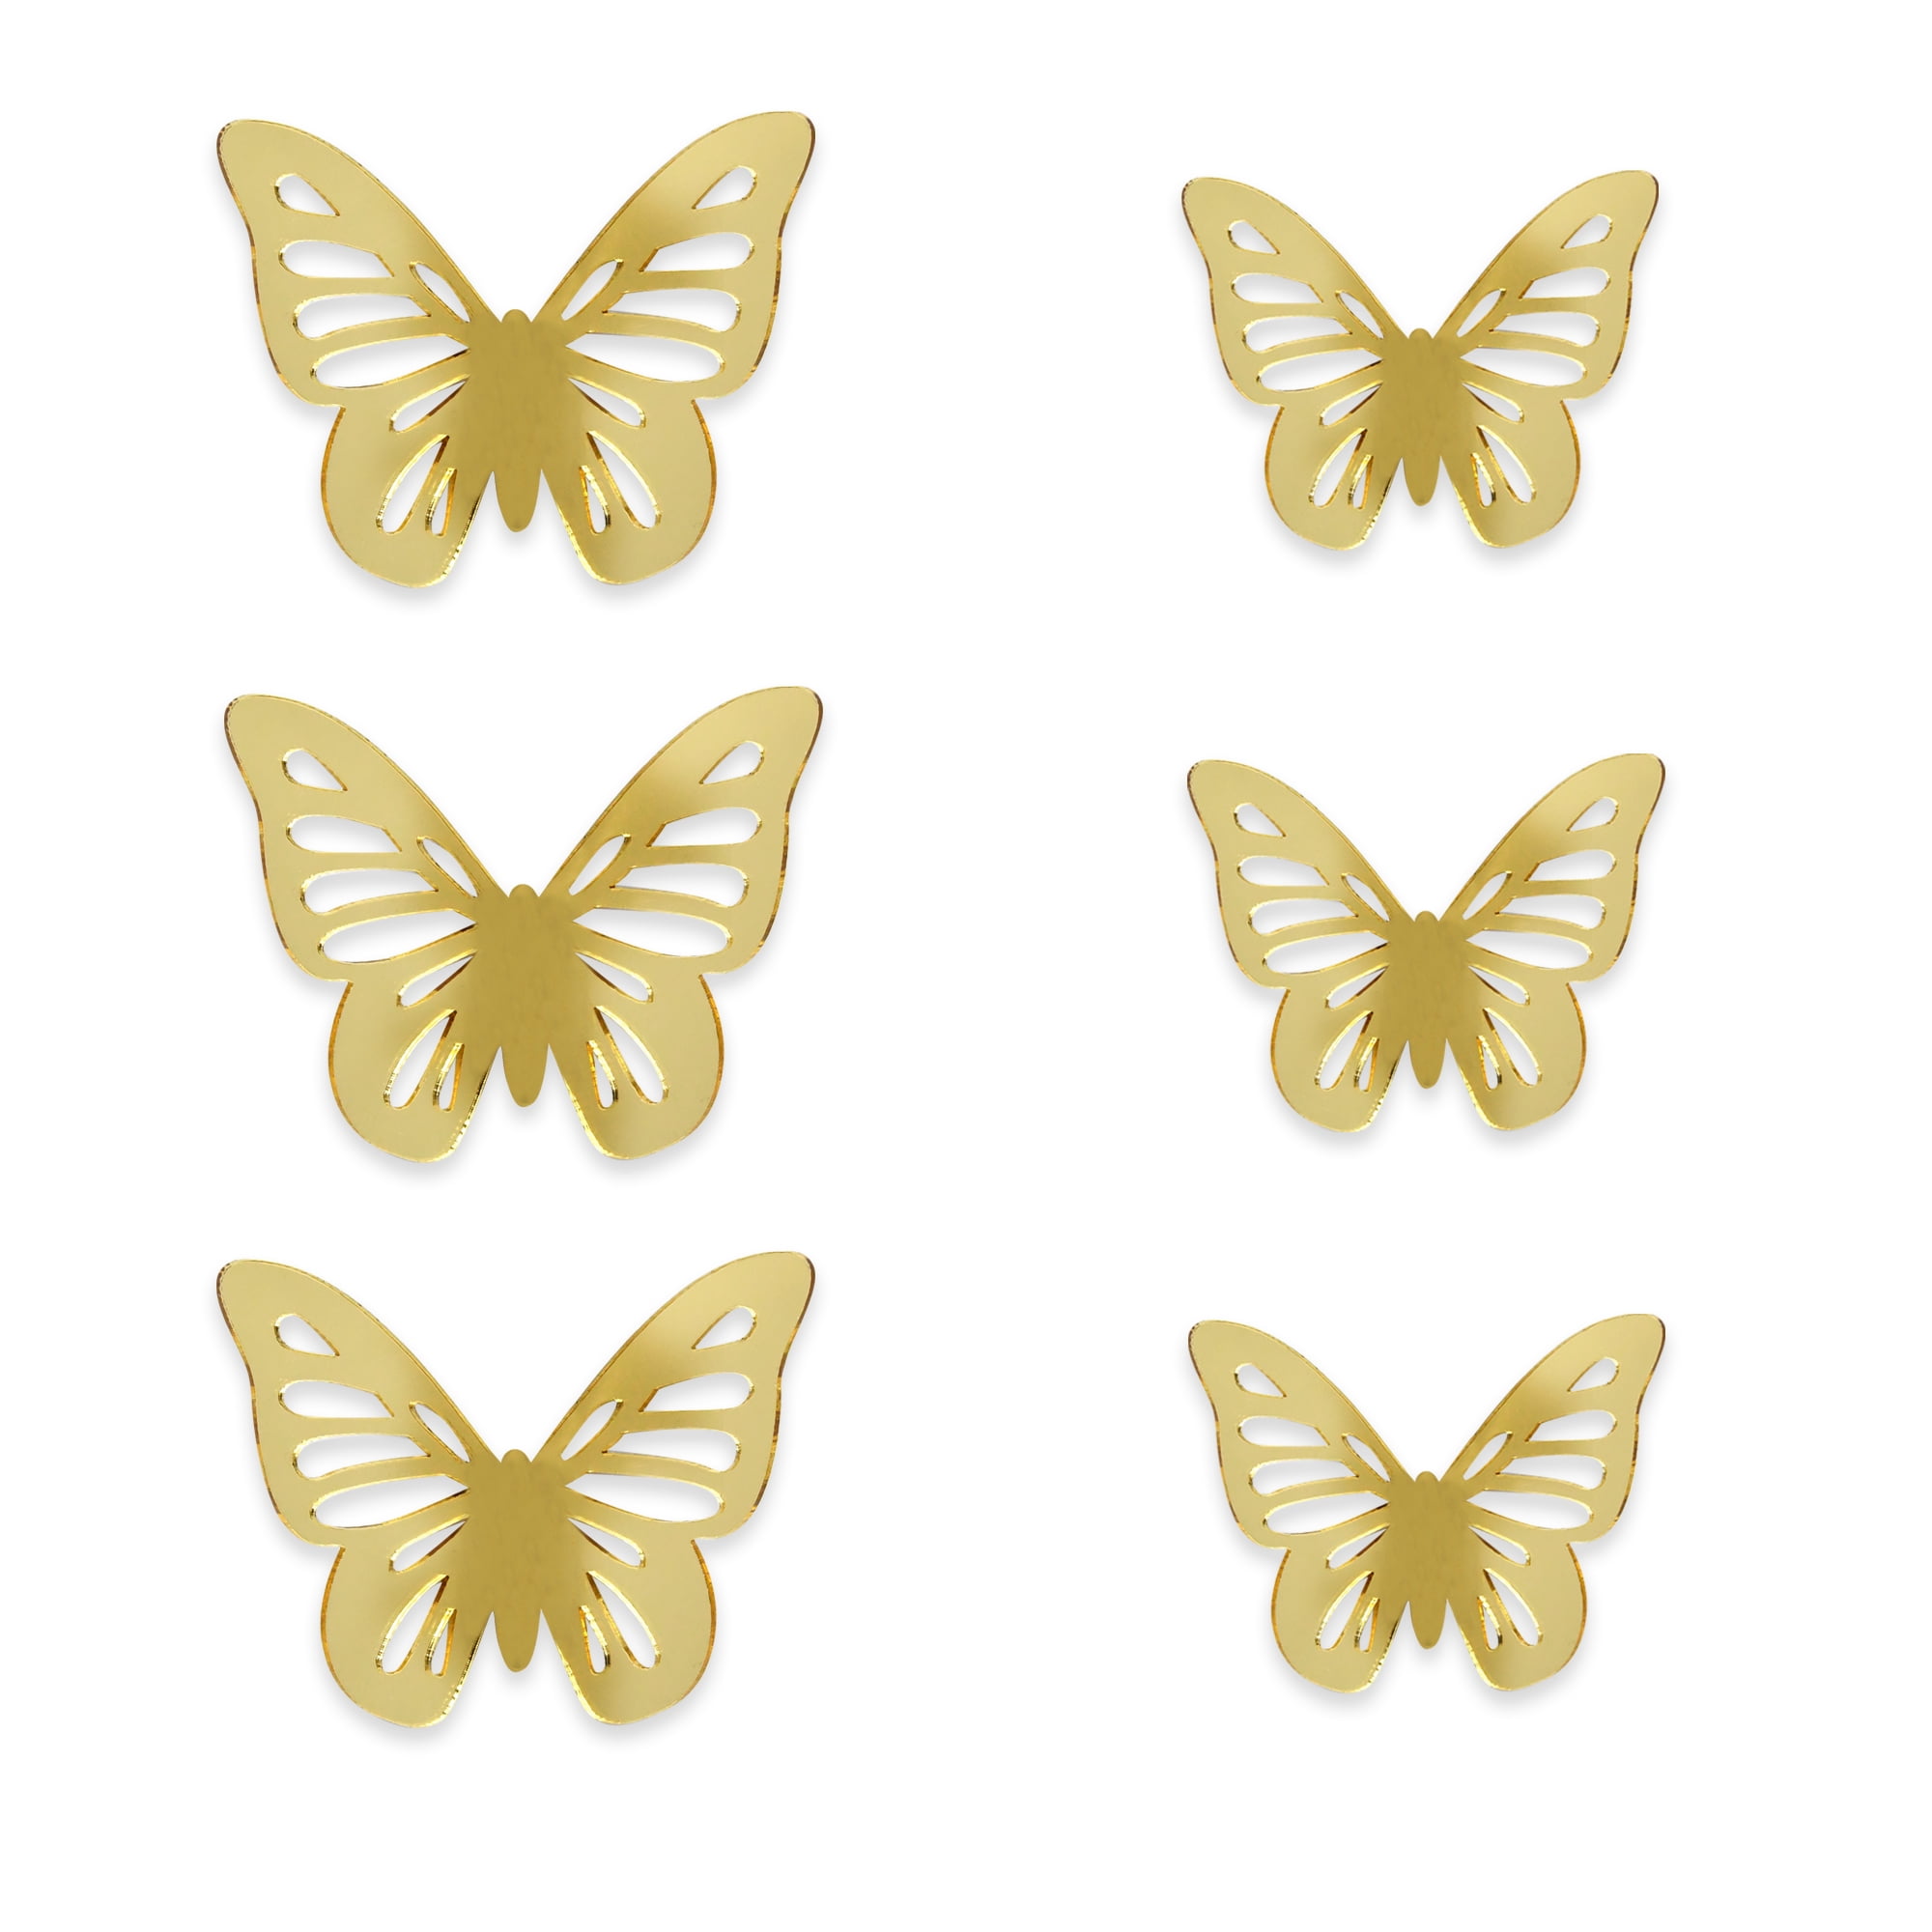 Furniture Wall Self Adhesive Stickers Cut Stick Clear White Cream Butterflies 